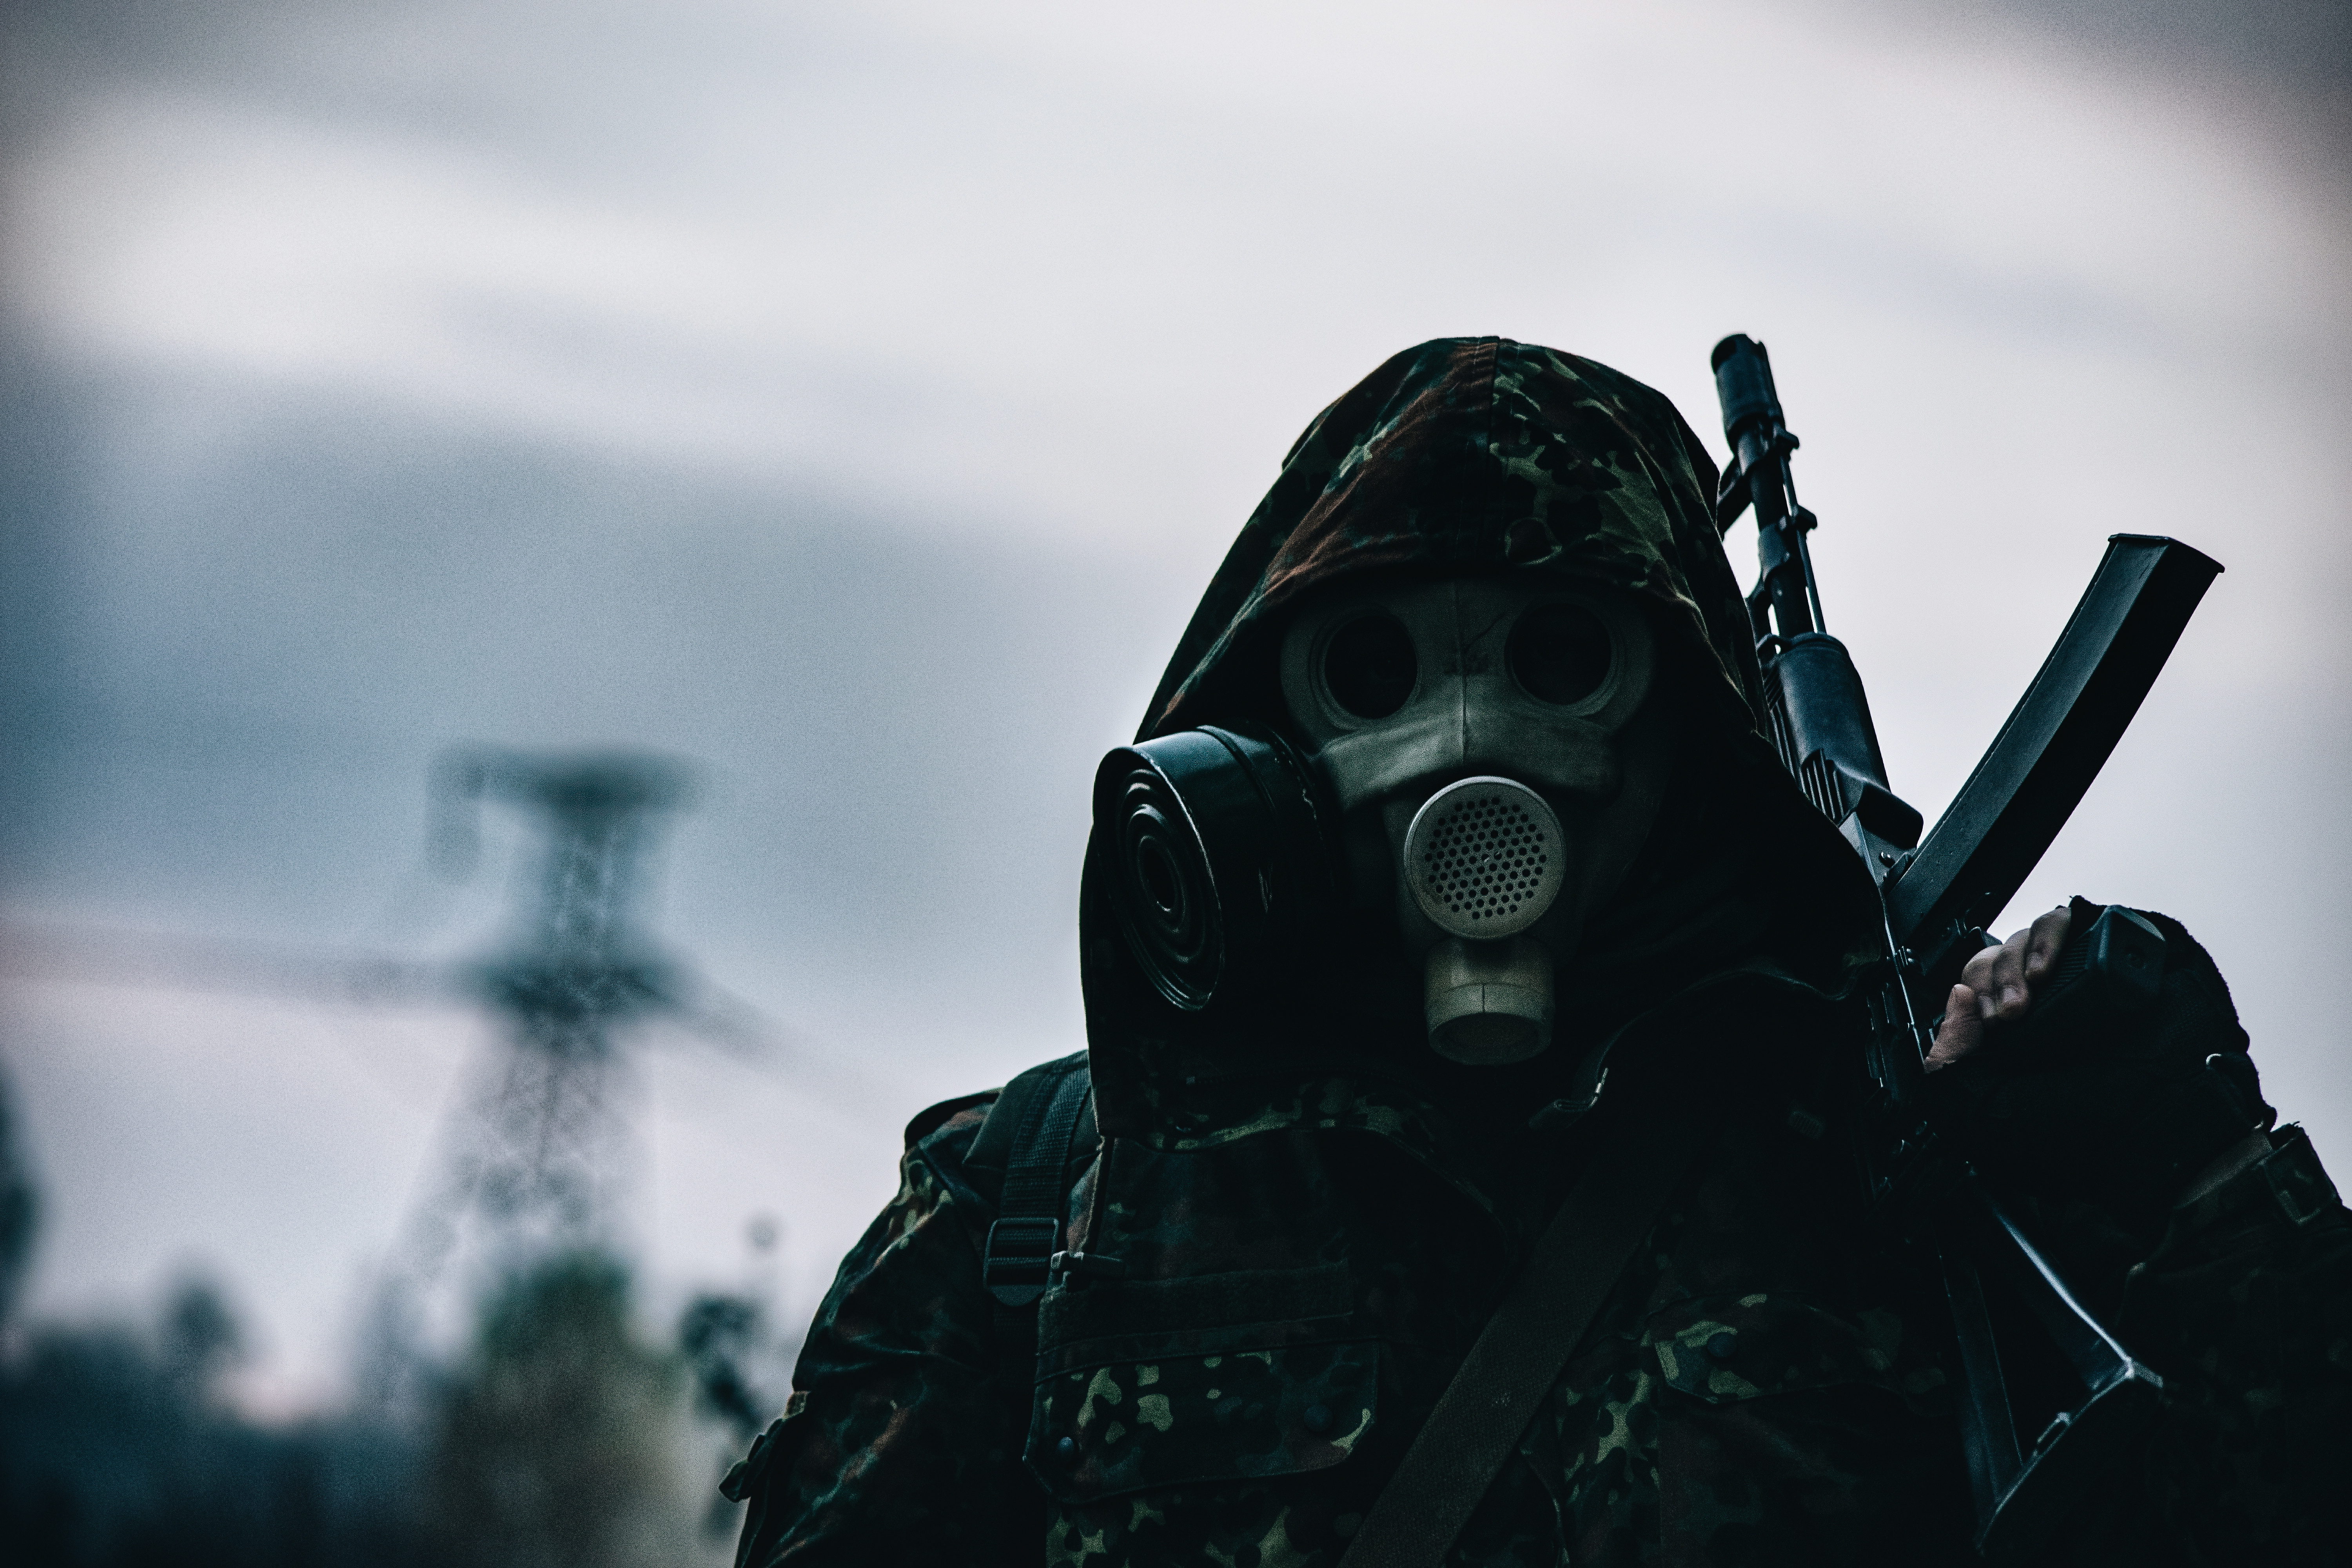 Coal Mines, Land Mines and Nuclear Bombs: The Environmental Cost of the War in Eastern Ukraine